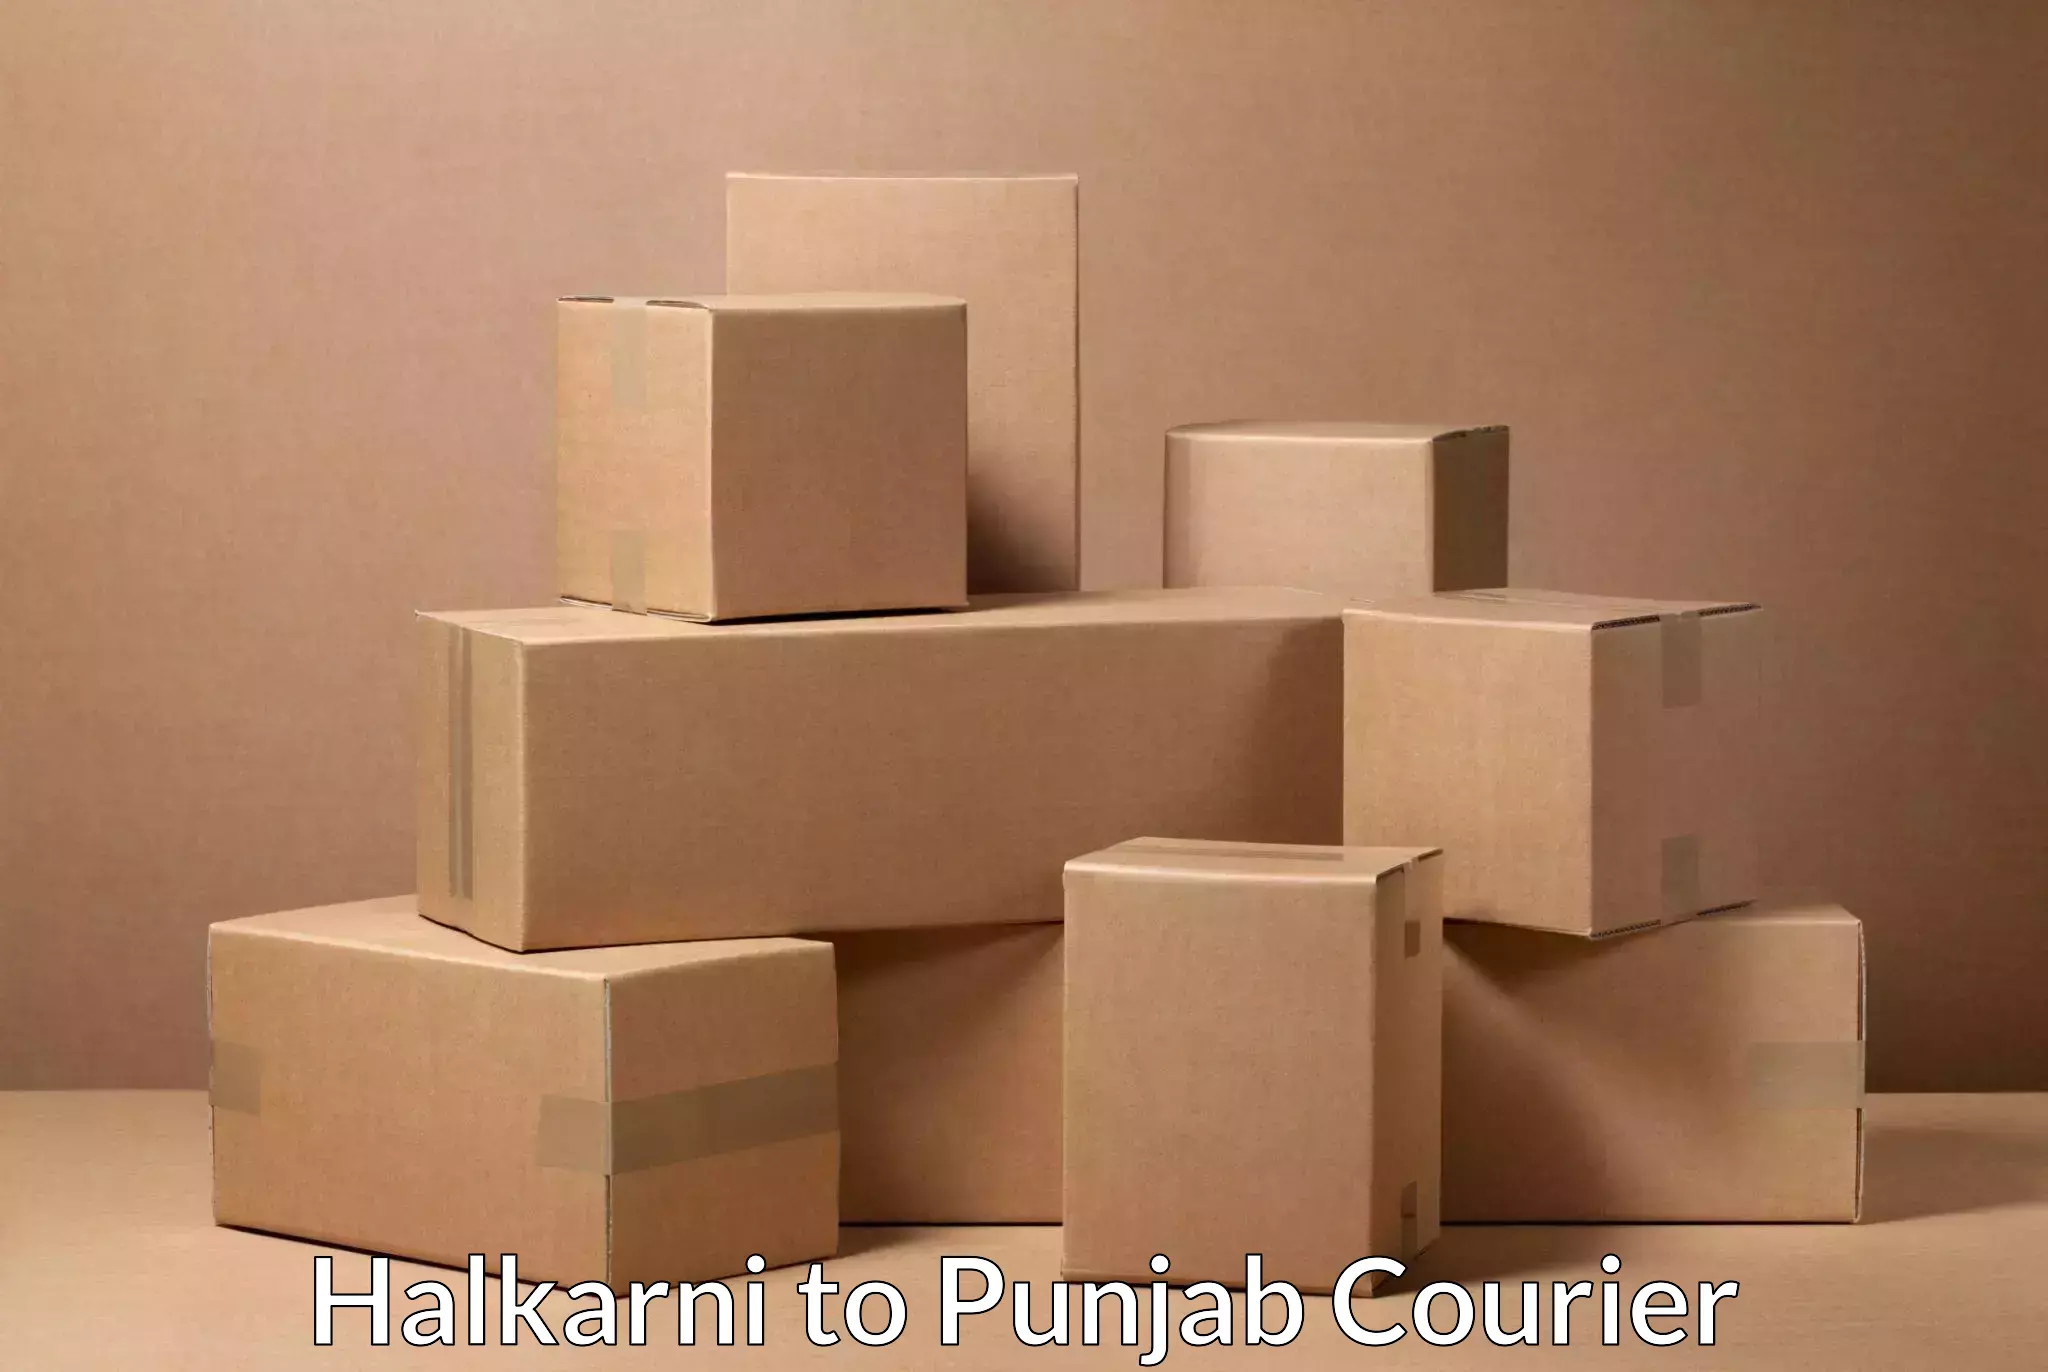 Quality courier services Halkarni to Punjab